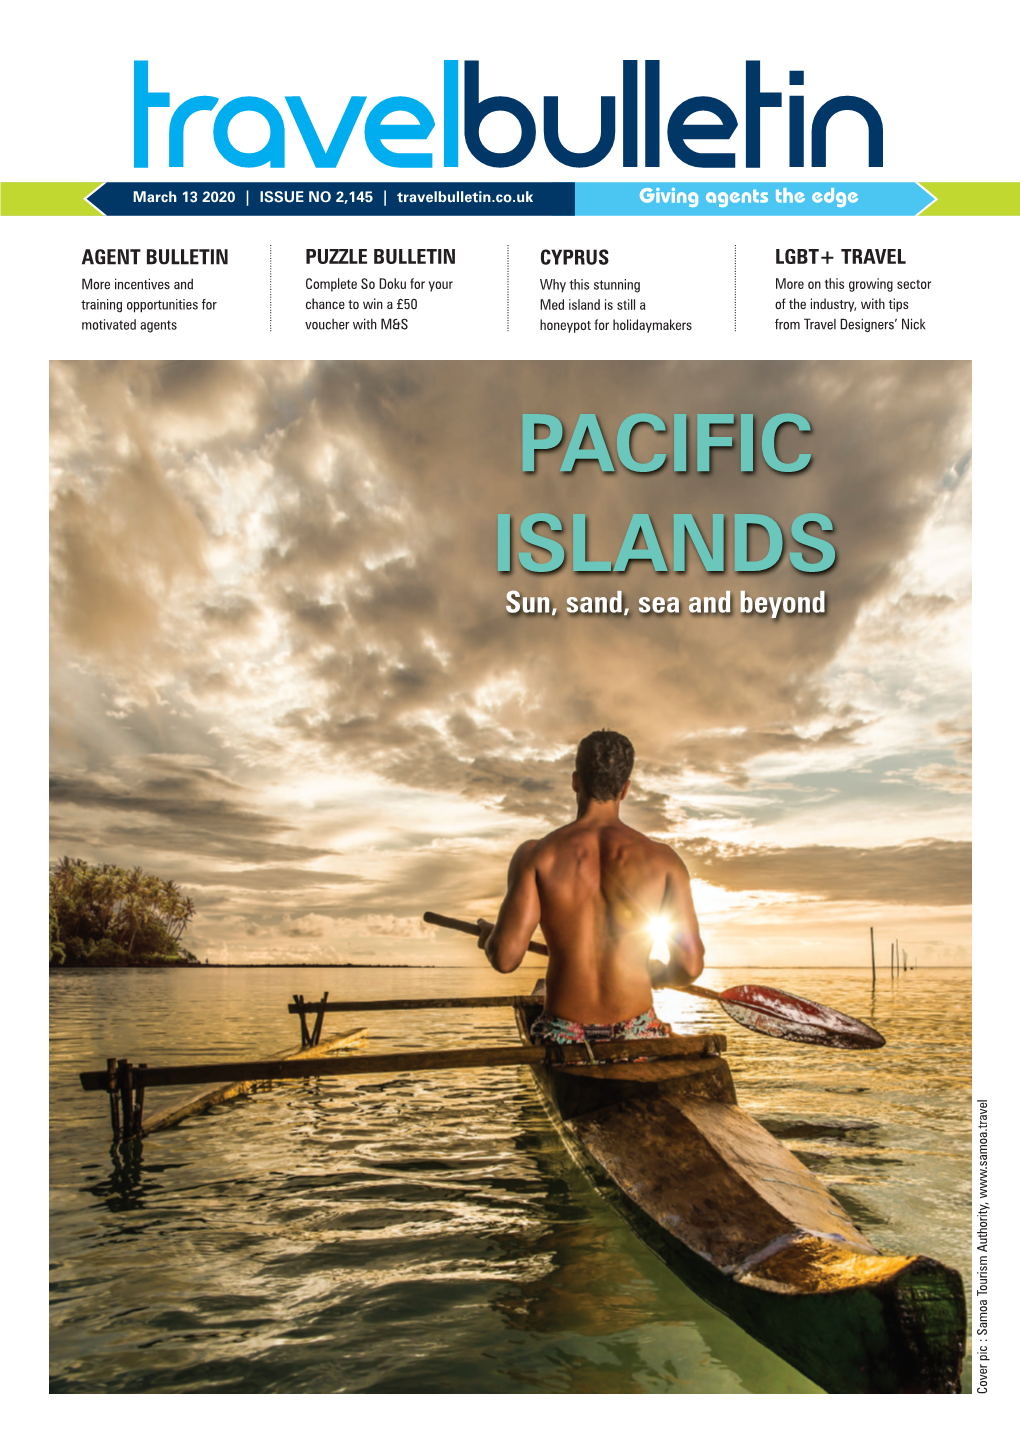 PACIFIC ISLANDS Published by : Printed By: Buxton Press @Travelbulletin Idyllic Escapes for Romance Alain Charles Publishing (Travel) Ltd Subscriptions Are £125 P.A